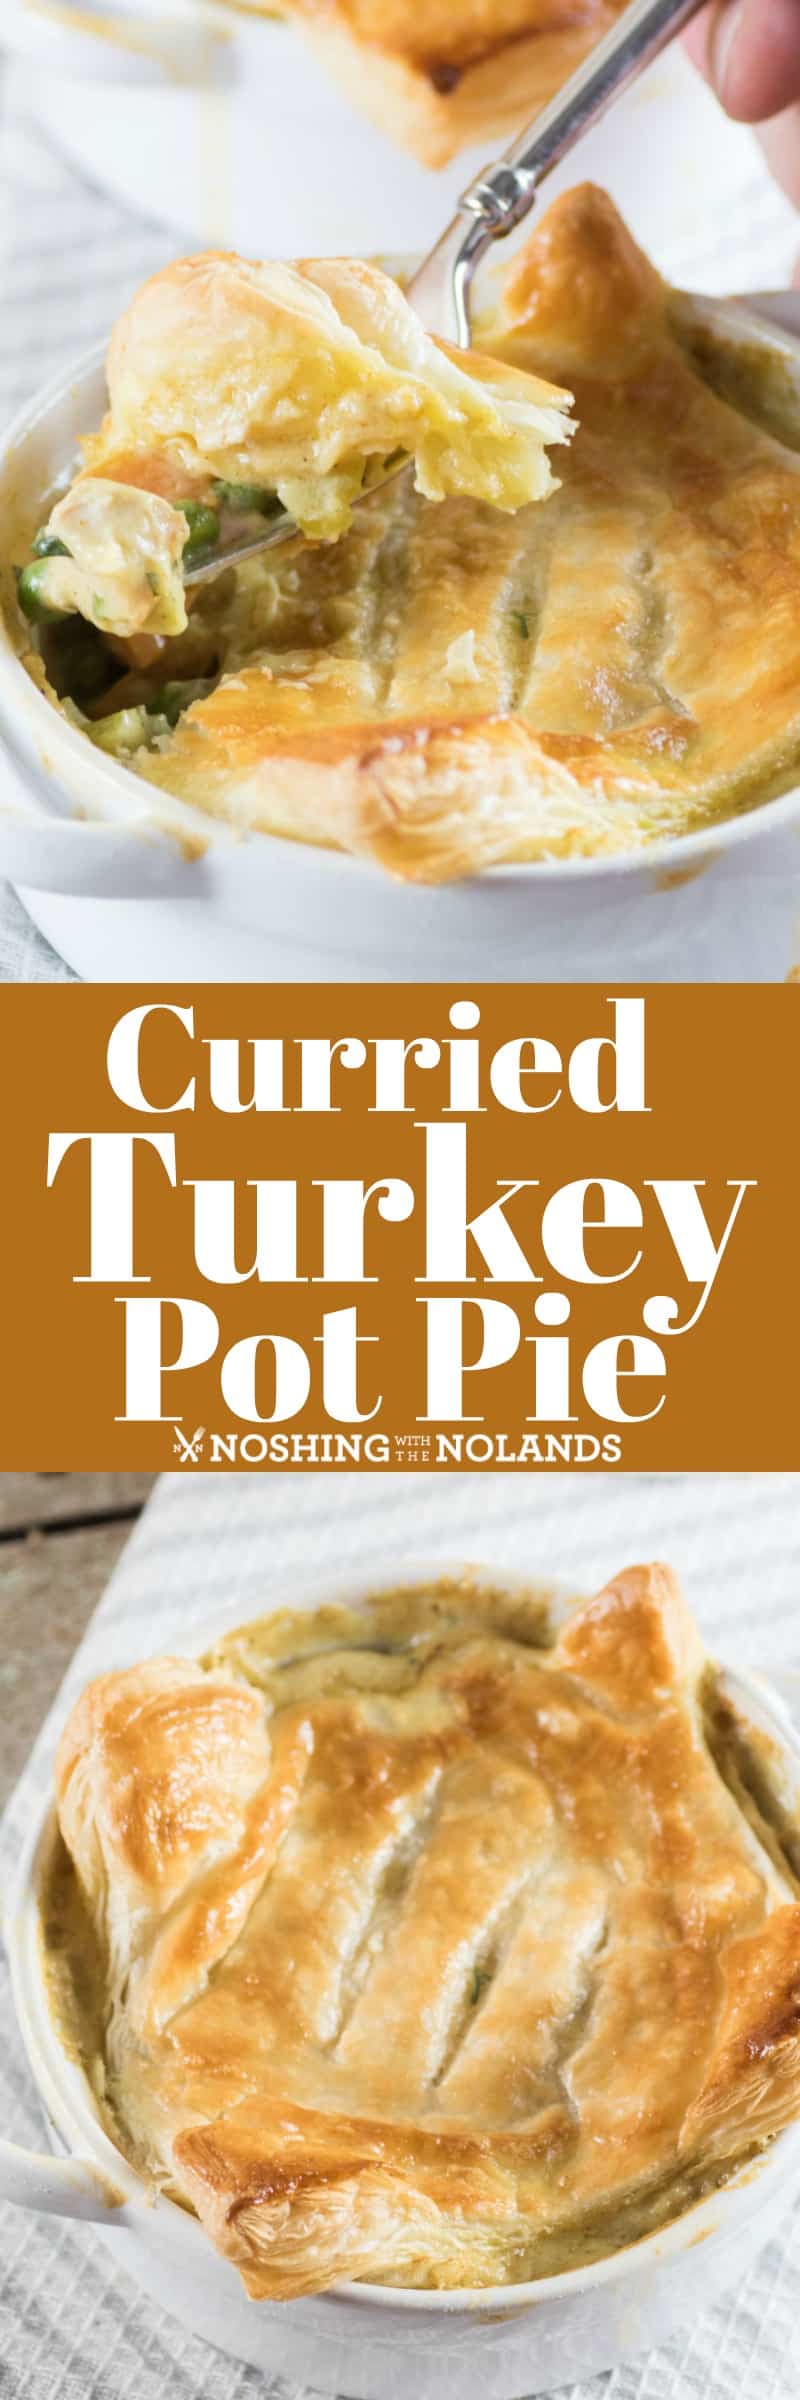 Curried Turkey Pot Pie is simple to make for a great weeknight meal. It takes under 30 minutes to pull together and uses up that leftover turkey! #leftoverturkey #turkey #potpie #WeekdaySuppers